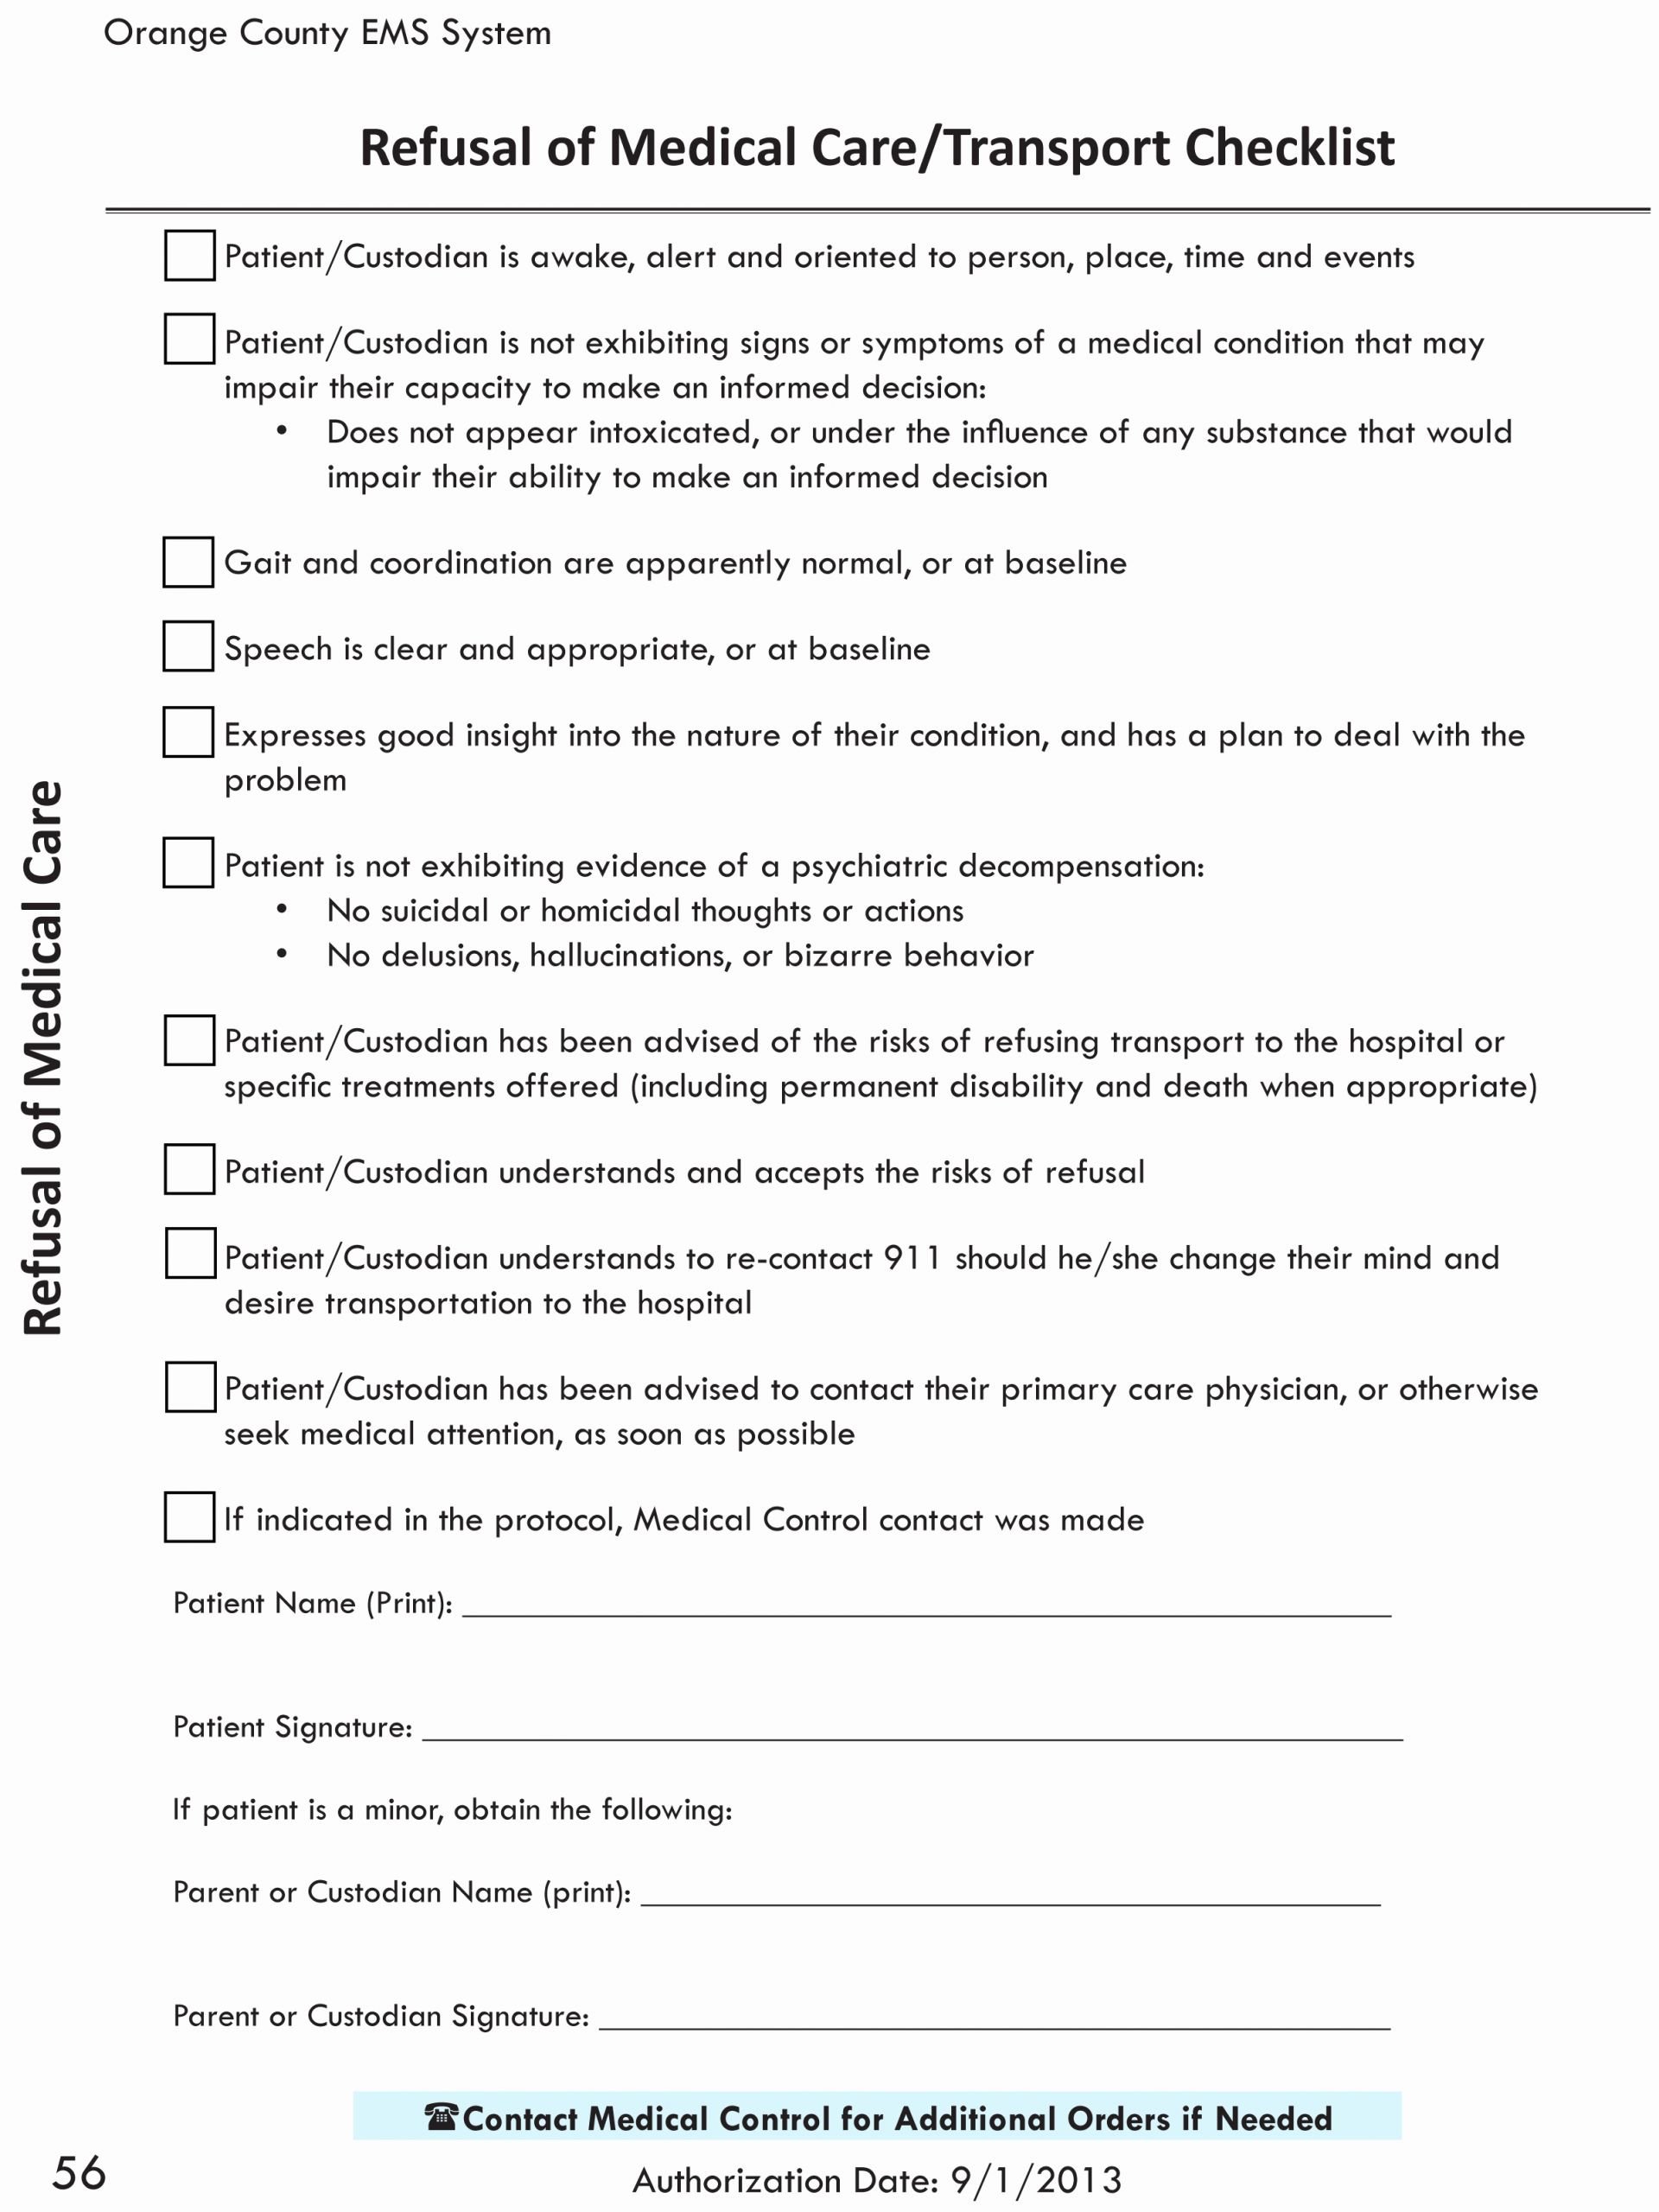 Medical Treatment Refusal form Template Beautiful Refusal Medical Treatment form